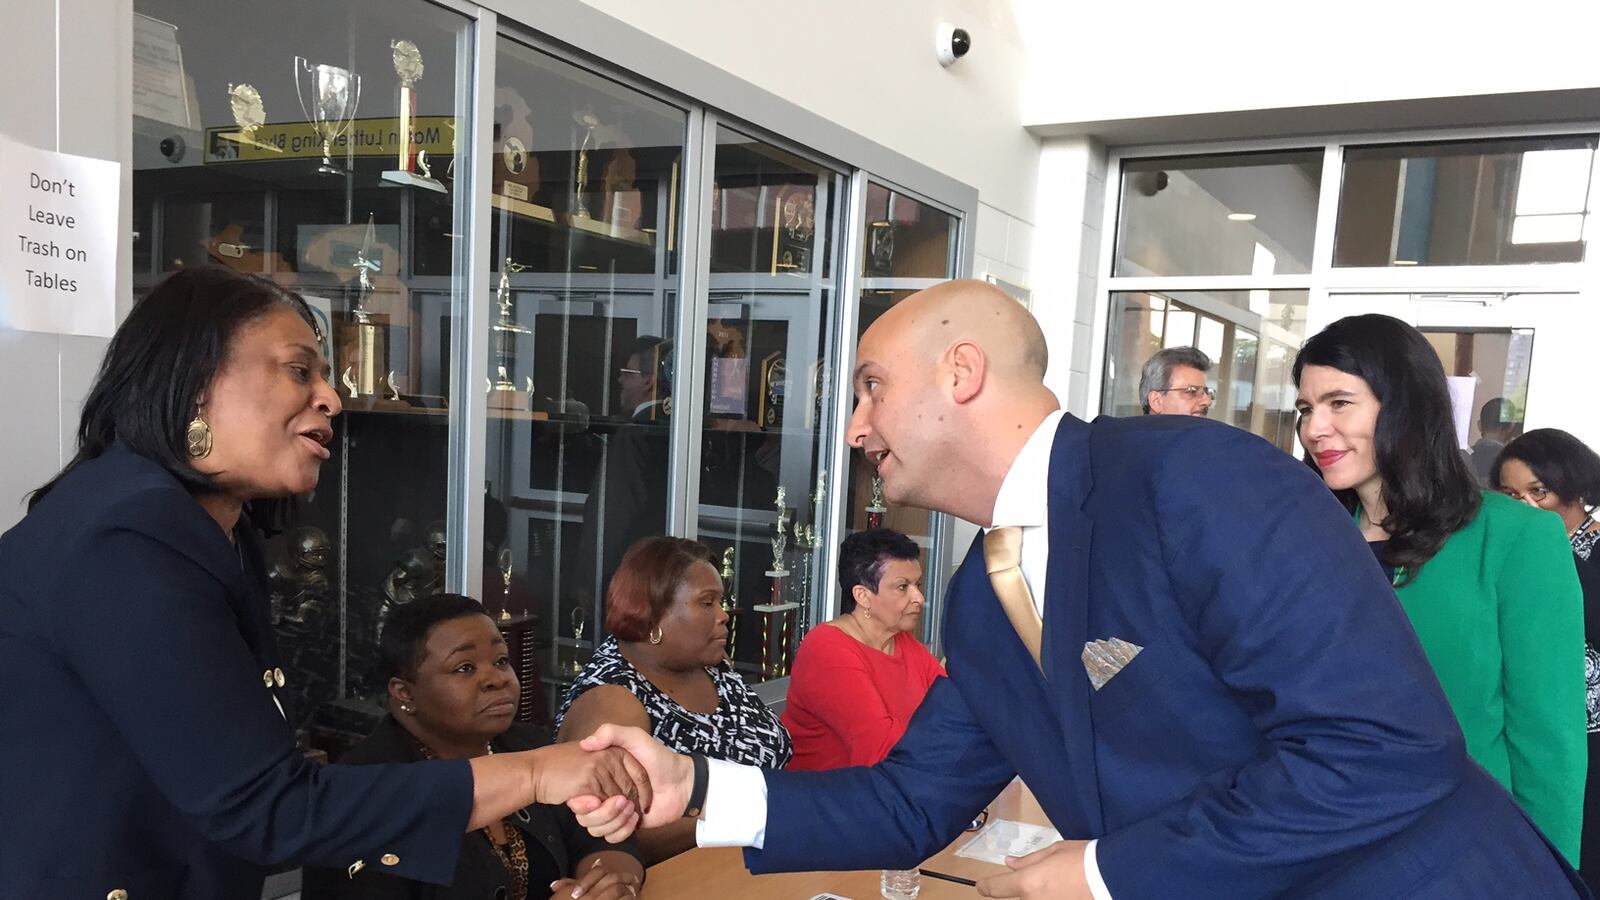 On his first day as Detroit schools superintendent, Nikolai Vitti, with former interim superintendent Alycia Meriweather, greets principals at a teacher hiring fair at Martin Luther King Jr. High School.